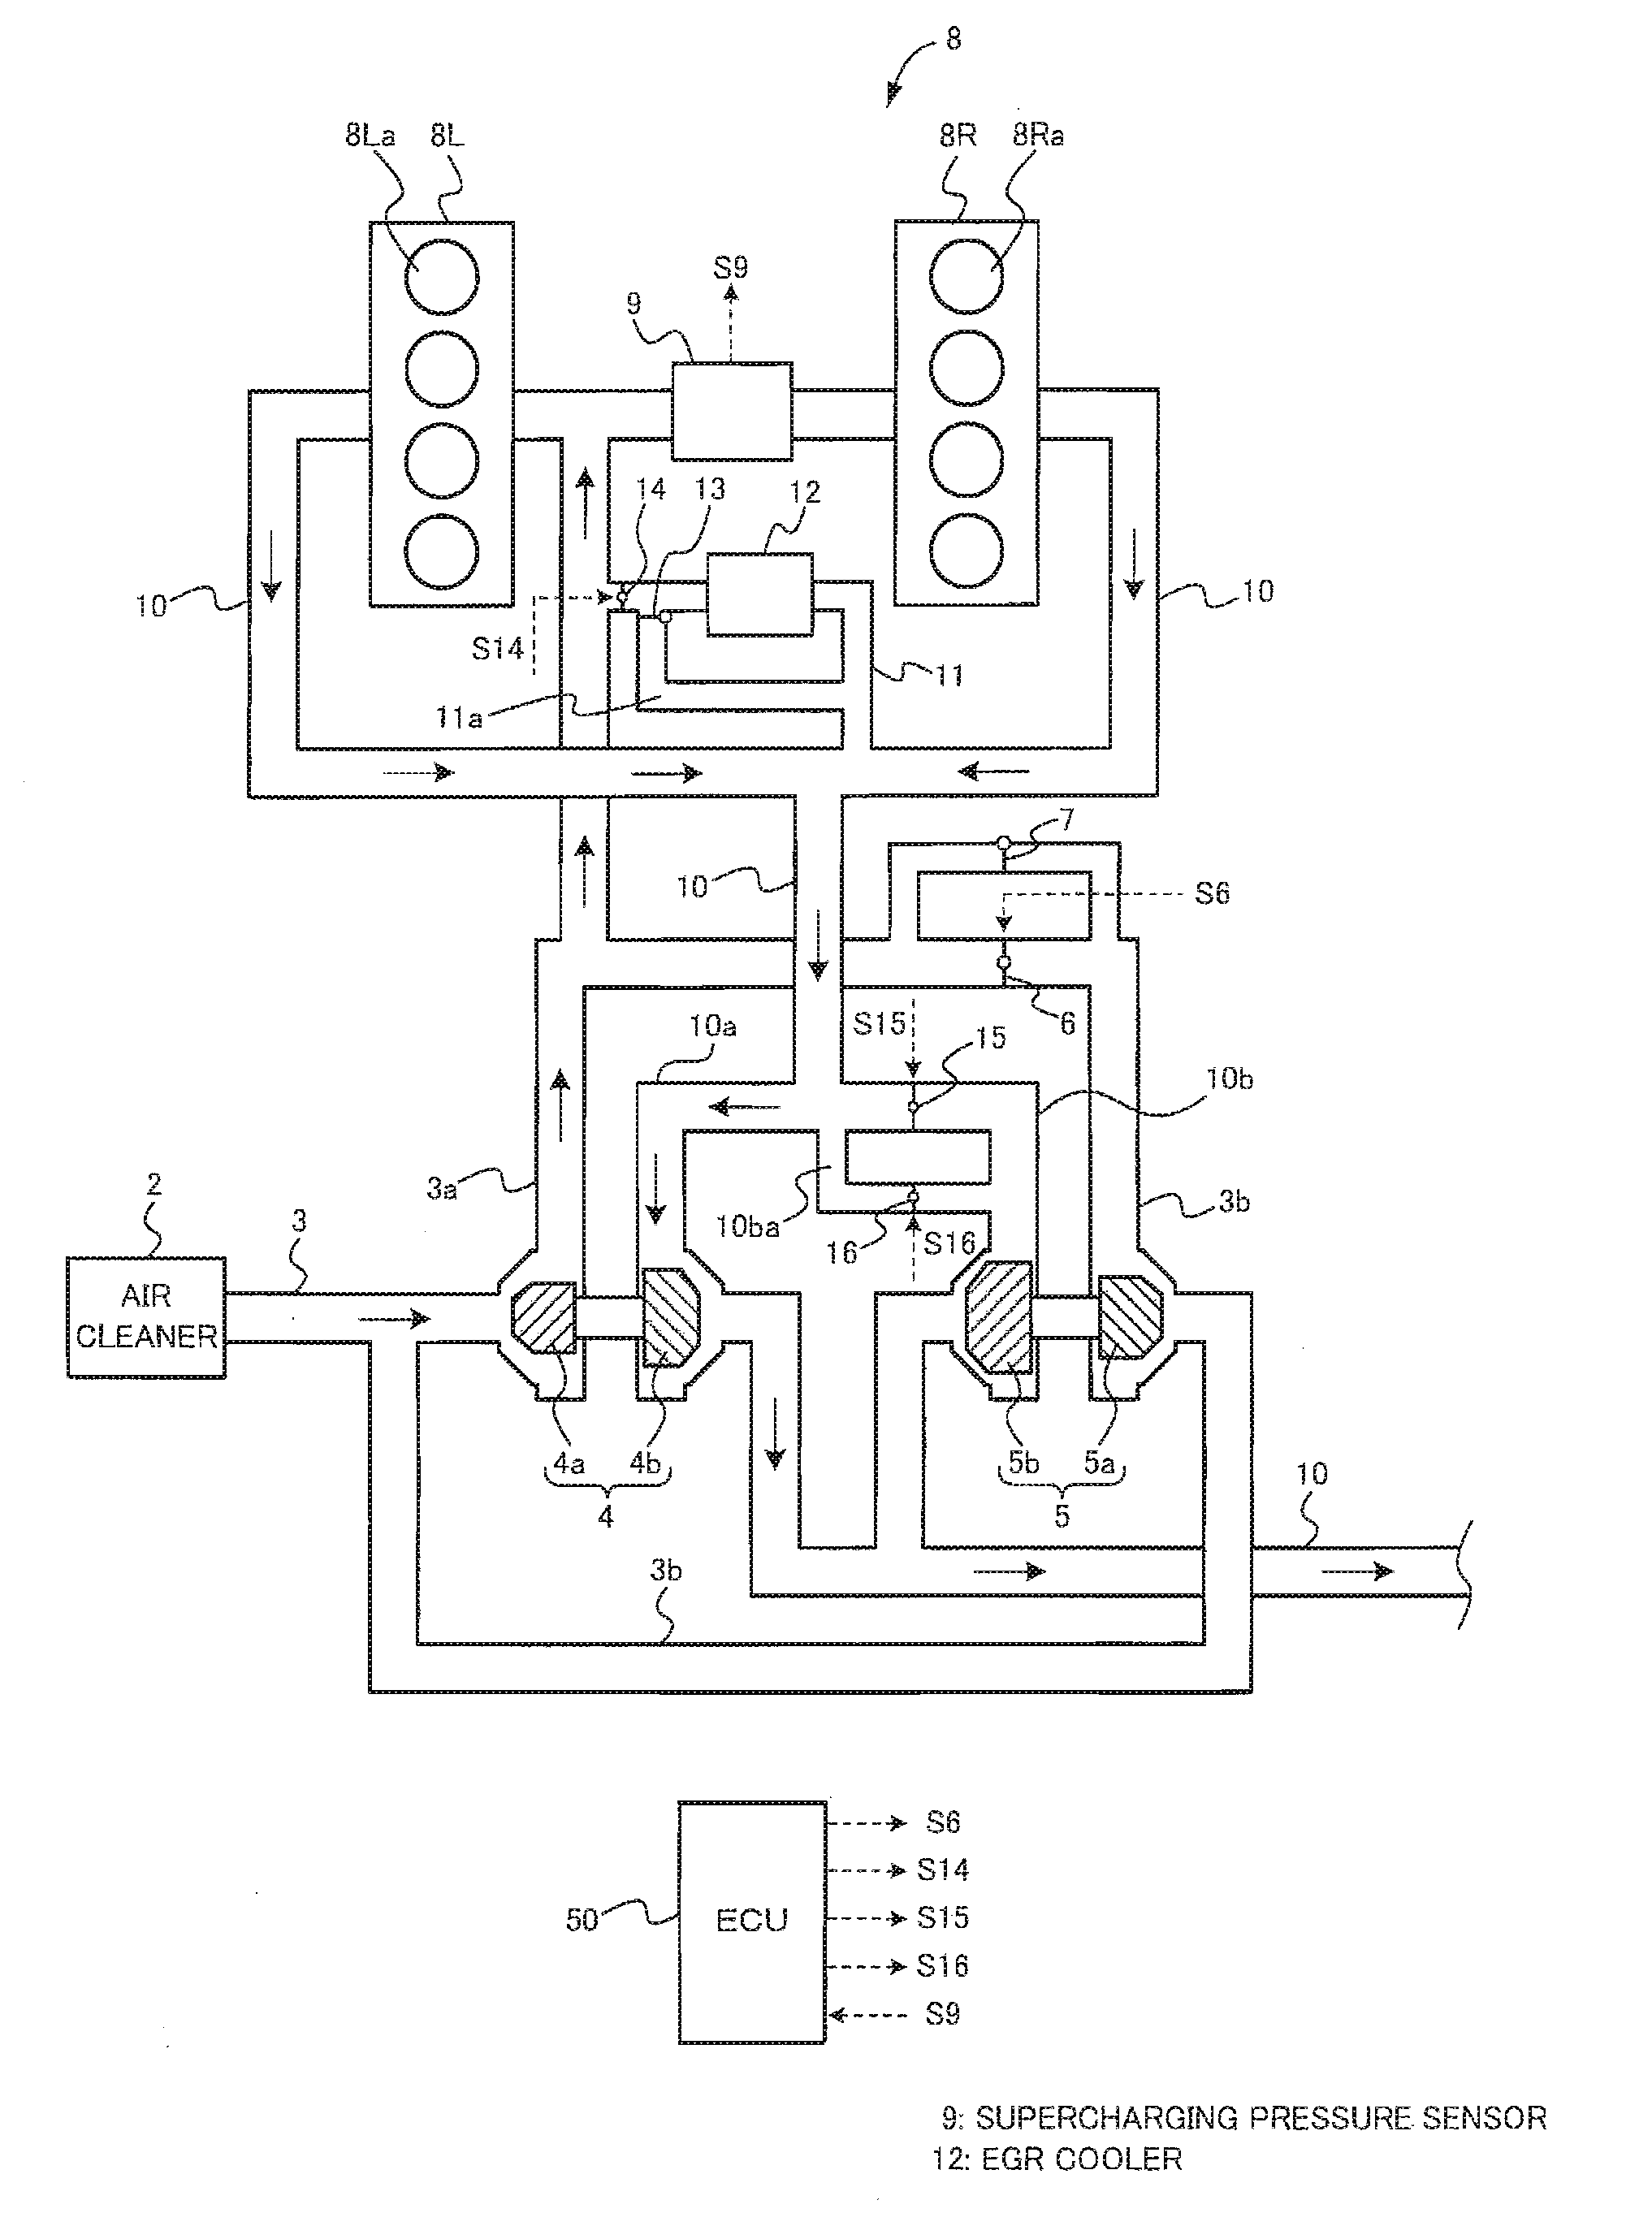 Supercharger control device for an internal combustion engine